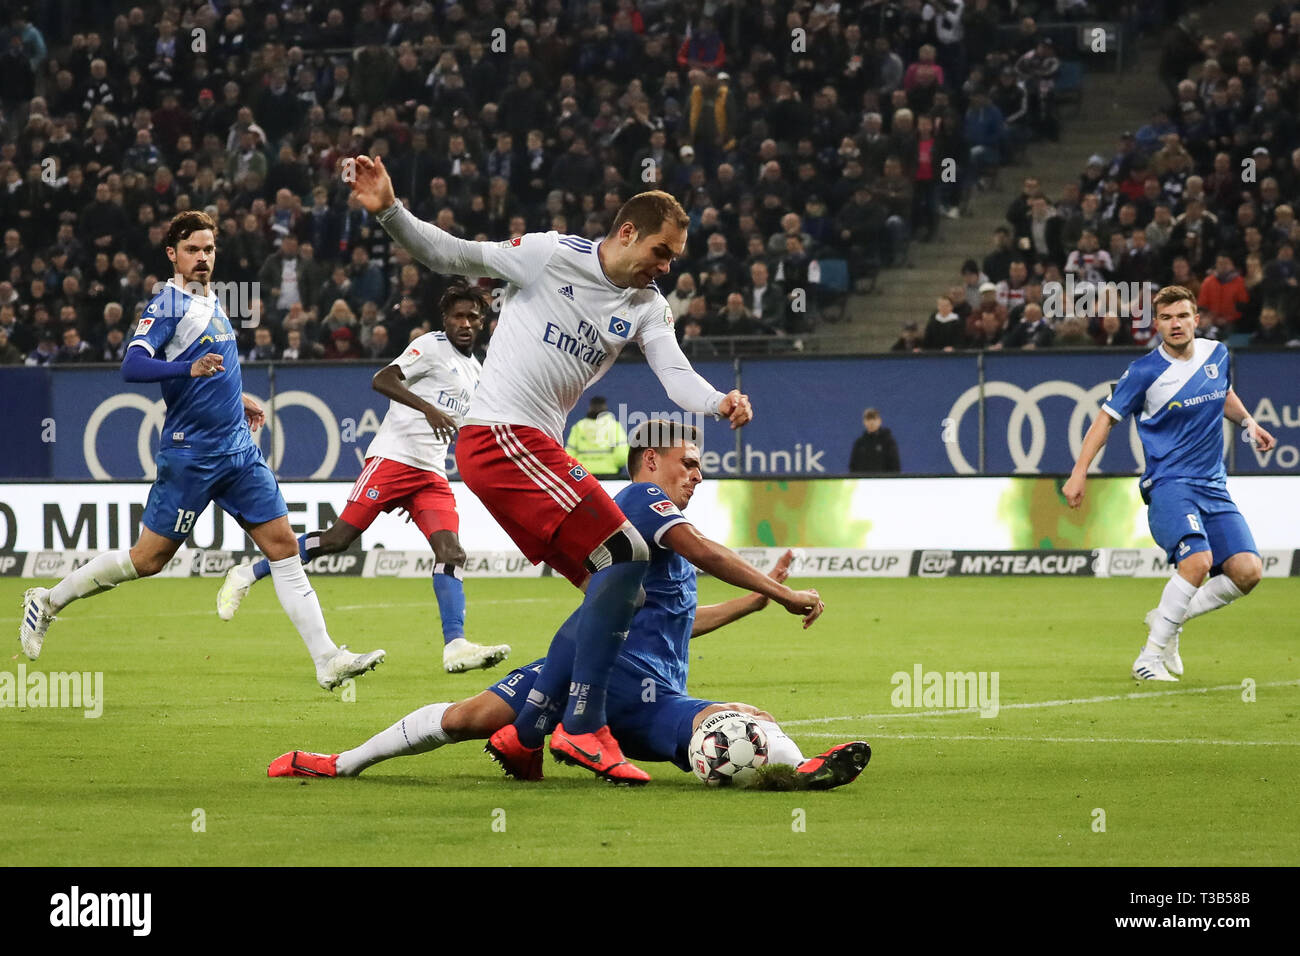 Hamburg, Germany. 08th Apr, 2019. Soccer: 2nd Bundesliga, 28th matchday, Hamburger SV - 1st FC Magdeburg in the Volksparkstadion. Hamburg's Pierre-Michel Lasogga (l) and Magdeburg's Tobias Müller in the duel for the ball. Credit: Christian Charisius/dpa - IMPORTANT NOTE: In accordance with the requirements of the DFL Deutsche Fußball Liga or the DFB Deutscher Fußball-Bund, it is prohibited to use or have used photographs taken in the stadium and/or the match in the form of sequence images and/or video-like photo sequences./dpa/Alamy Live News Stock Photo